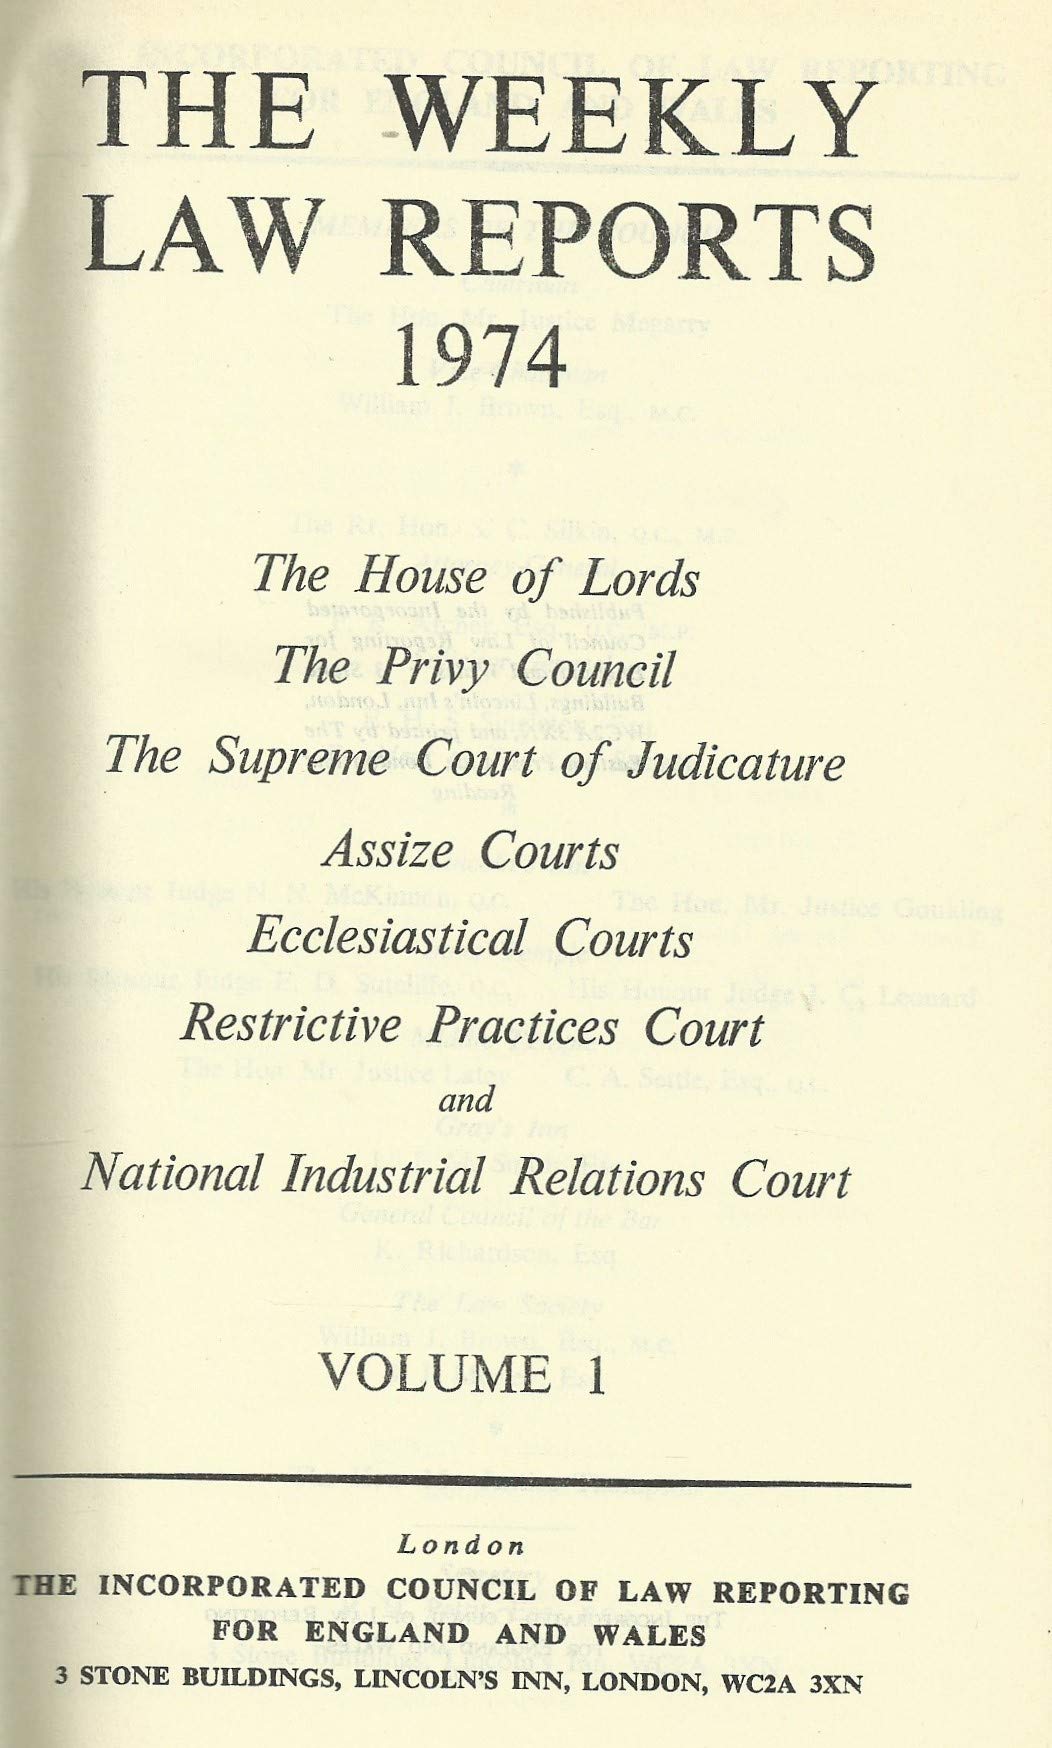 THE WEEKLY LAW REPORTS 1974: VOLUME I.